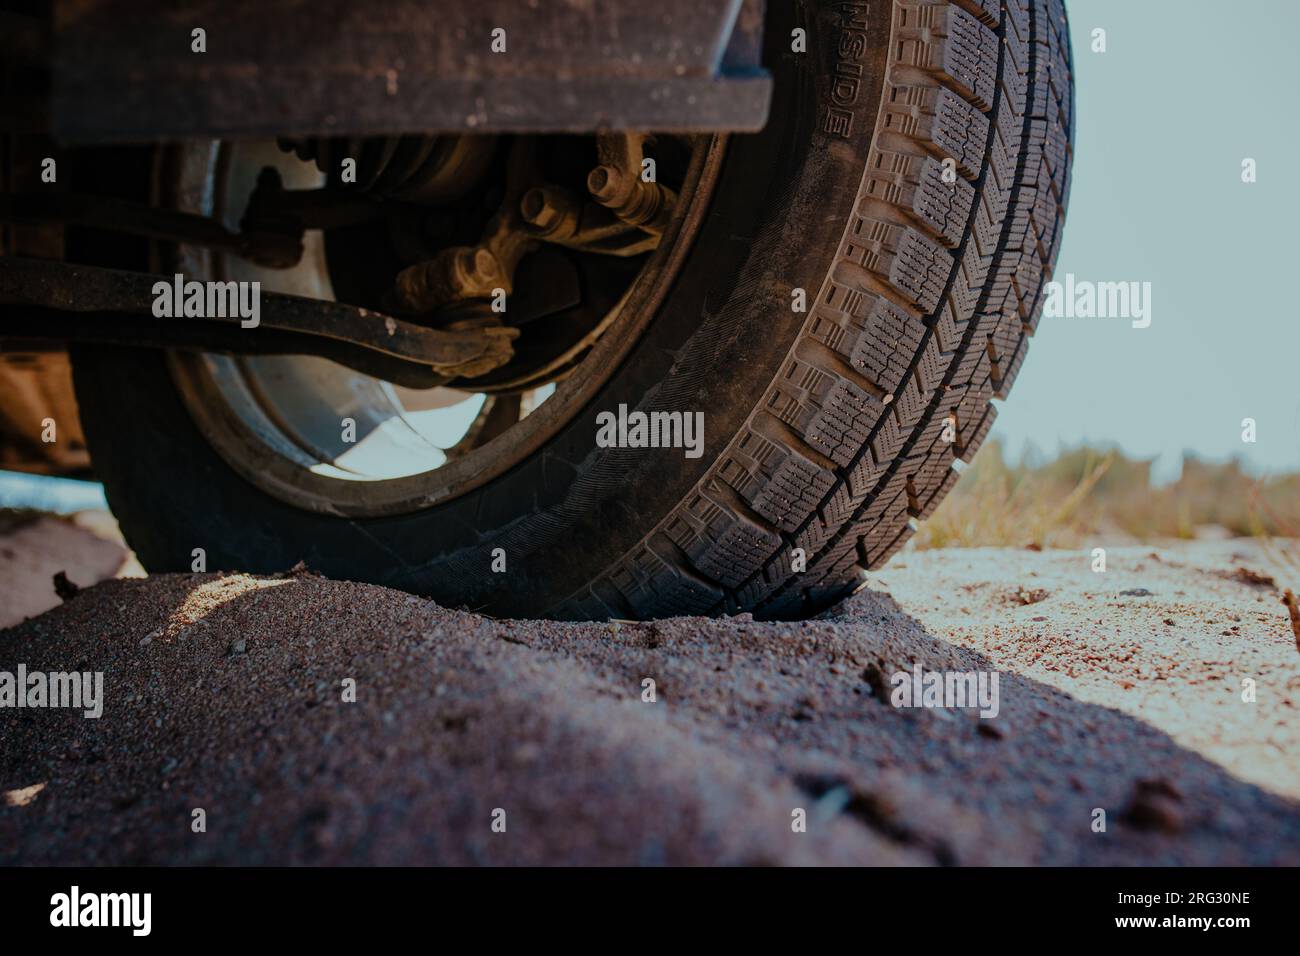 Car wheel on sand close-up view Stock Photo